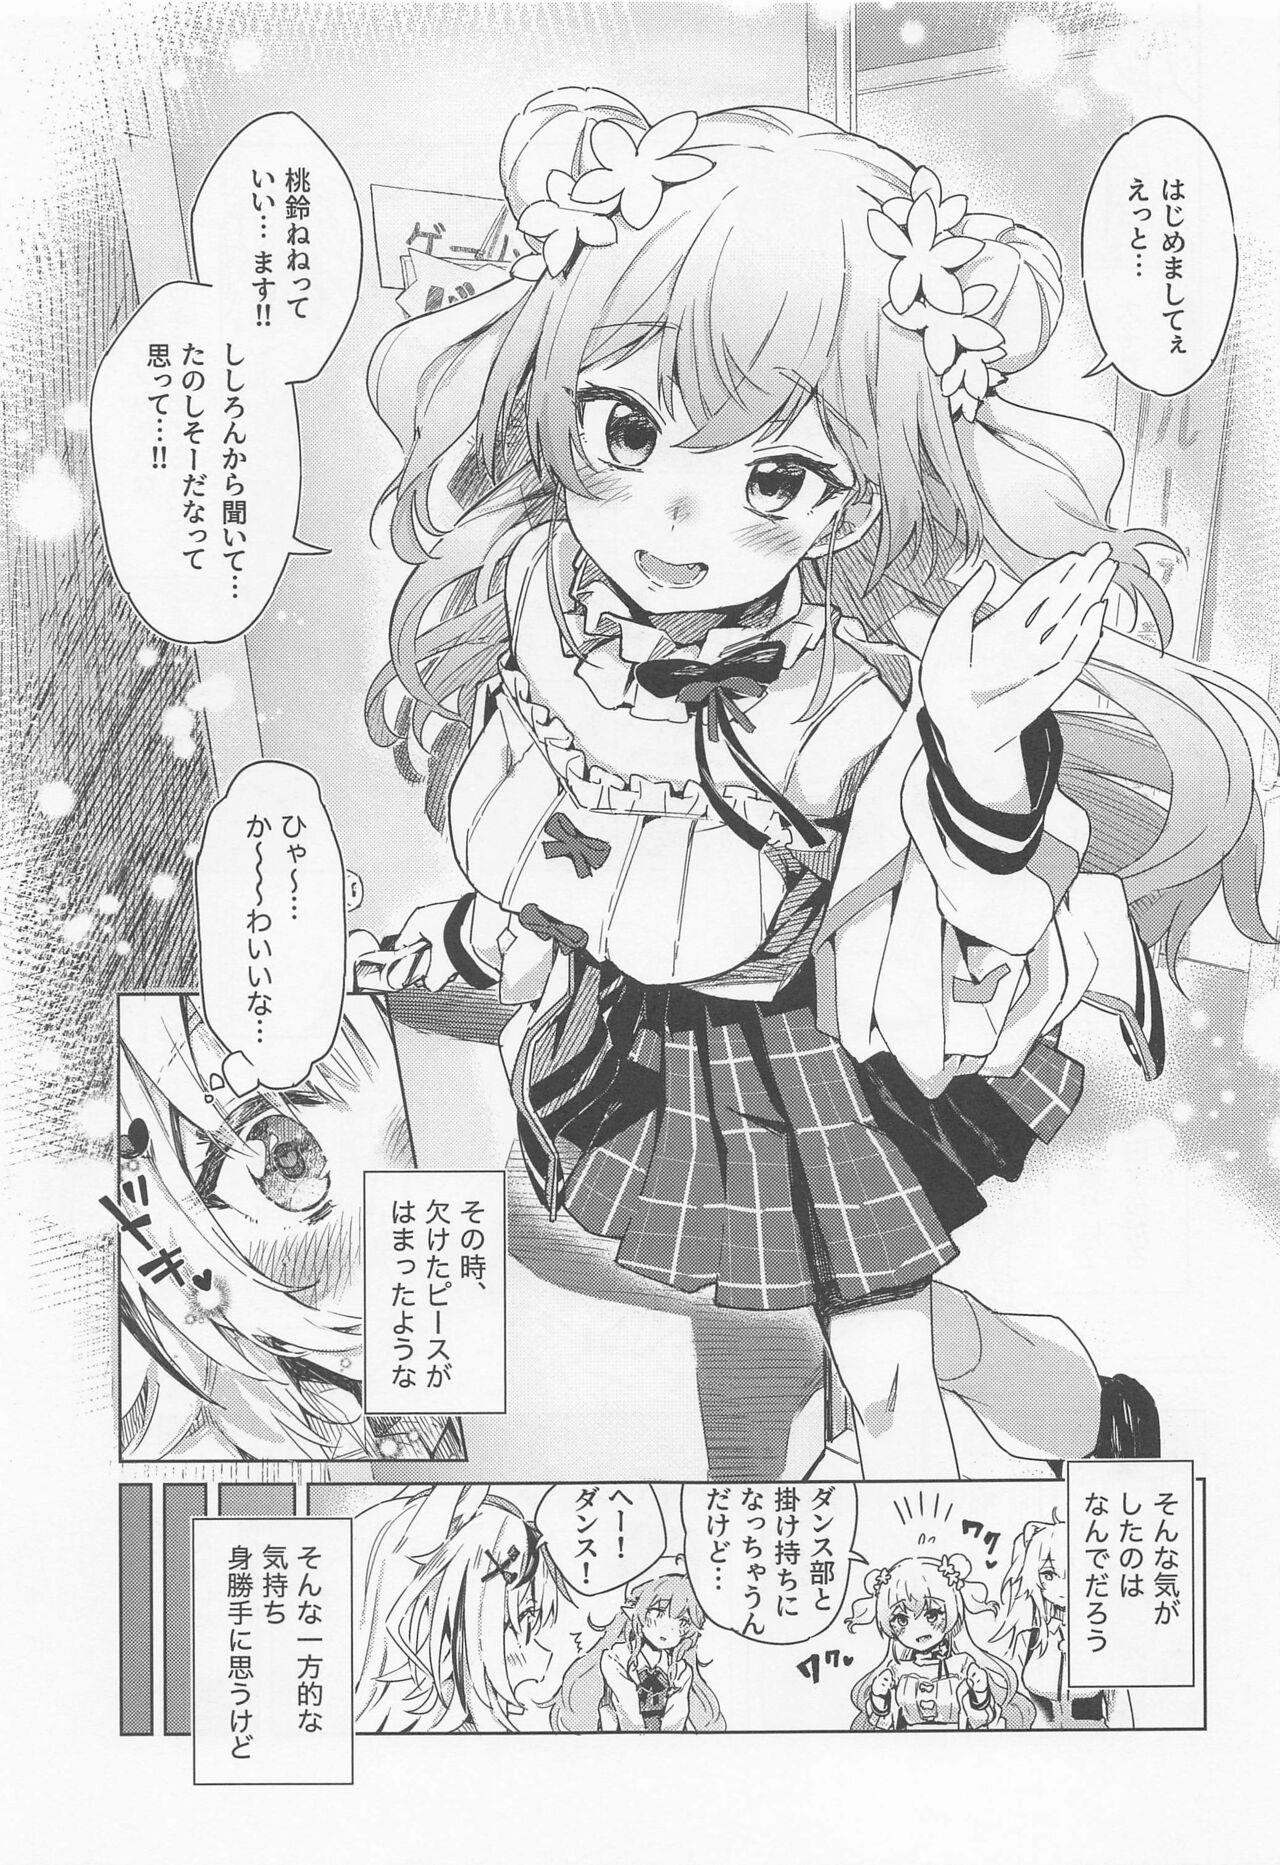 Dildos Fennec wa Iseijin no Yume o Miru ka - Does The Fennec Dream of The Lovely Visitor? - Hololive Gay - Page 4